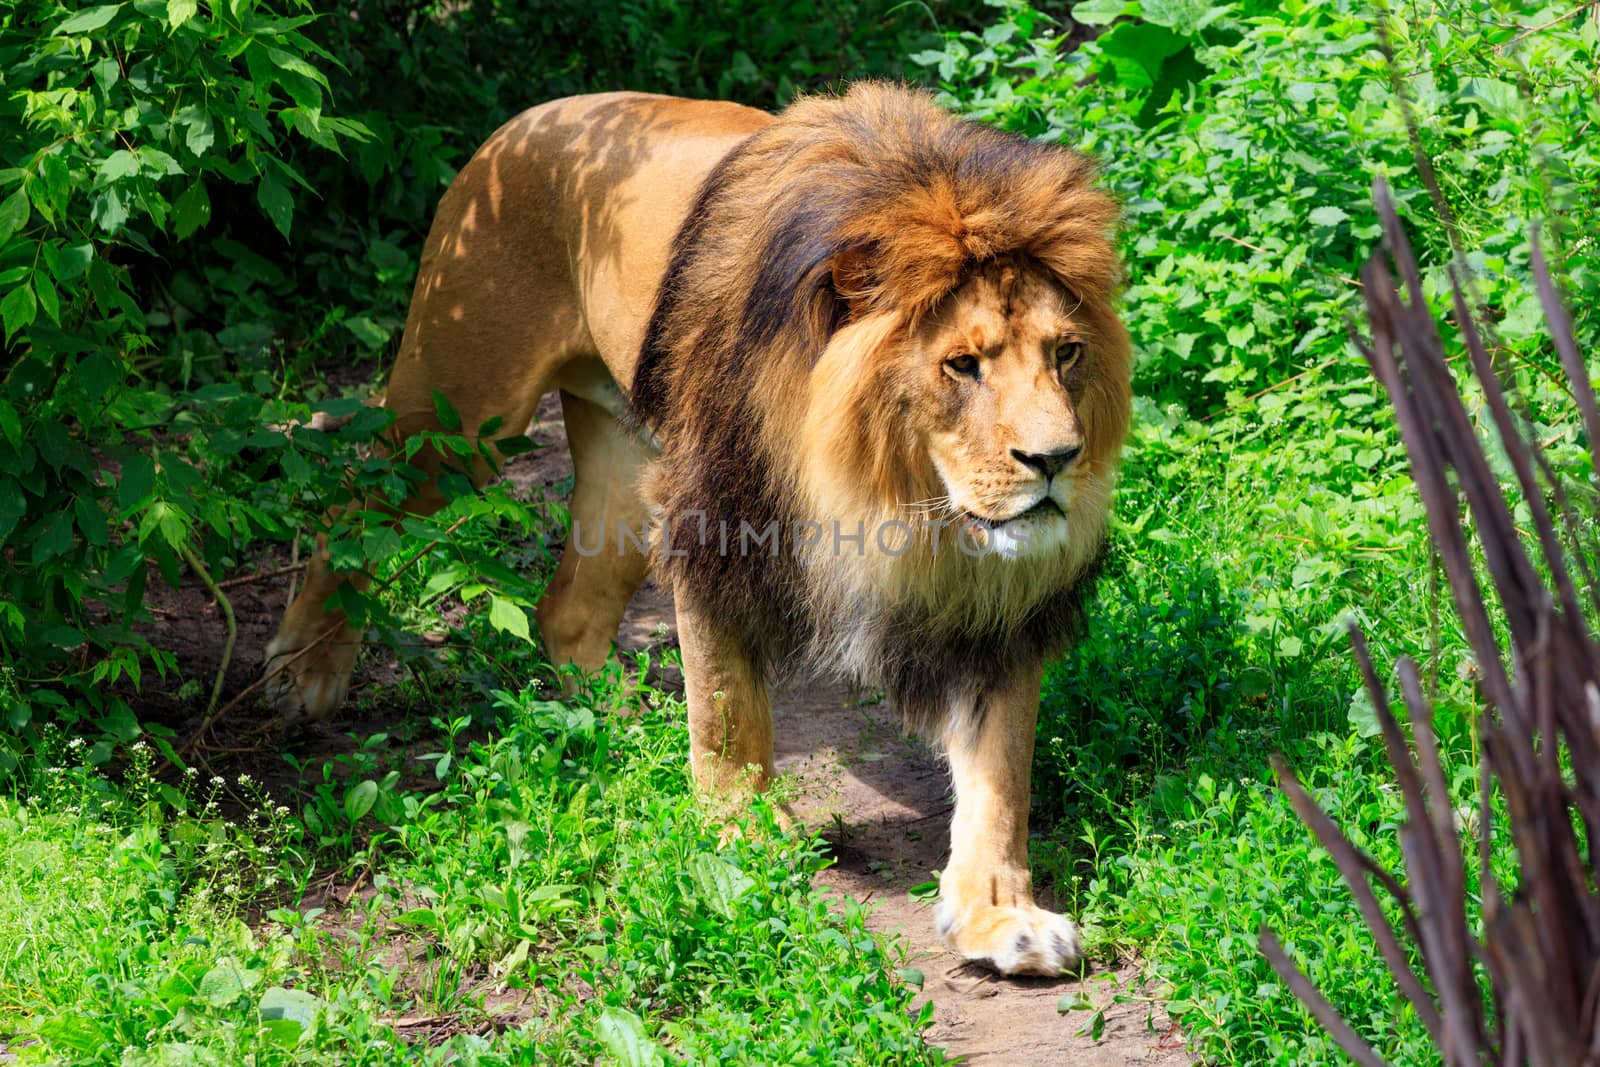 A wild lion with a large shaggy orange mane of hair walks along a forest path among green shrubs in sunny daytime. Close-up.